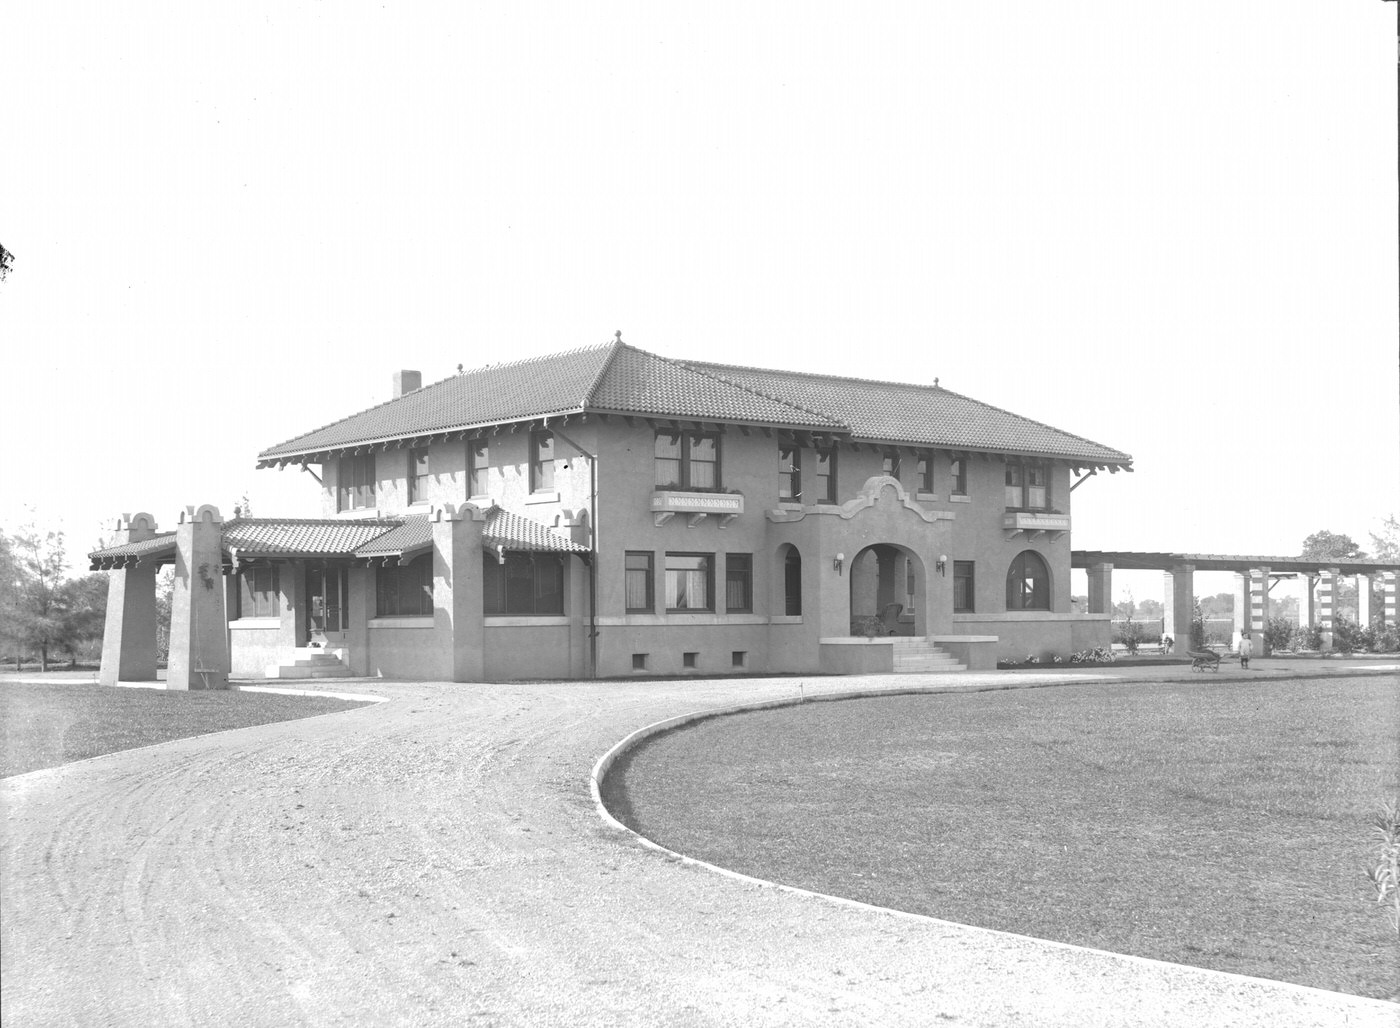 J. W. Dorris House Exterior, 1920. This building is located at 7th Ave. and Windsor and is part of the Encanto Community Church.